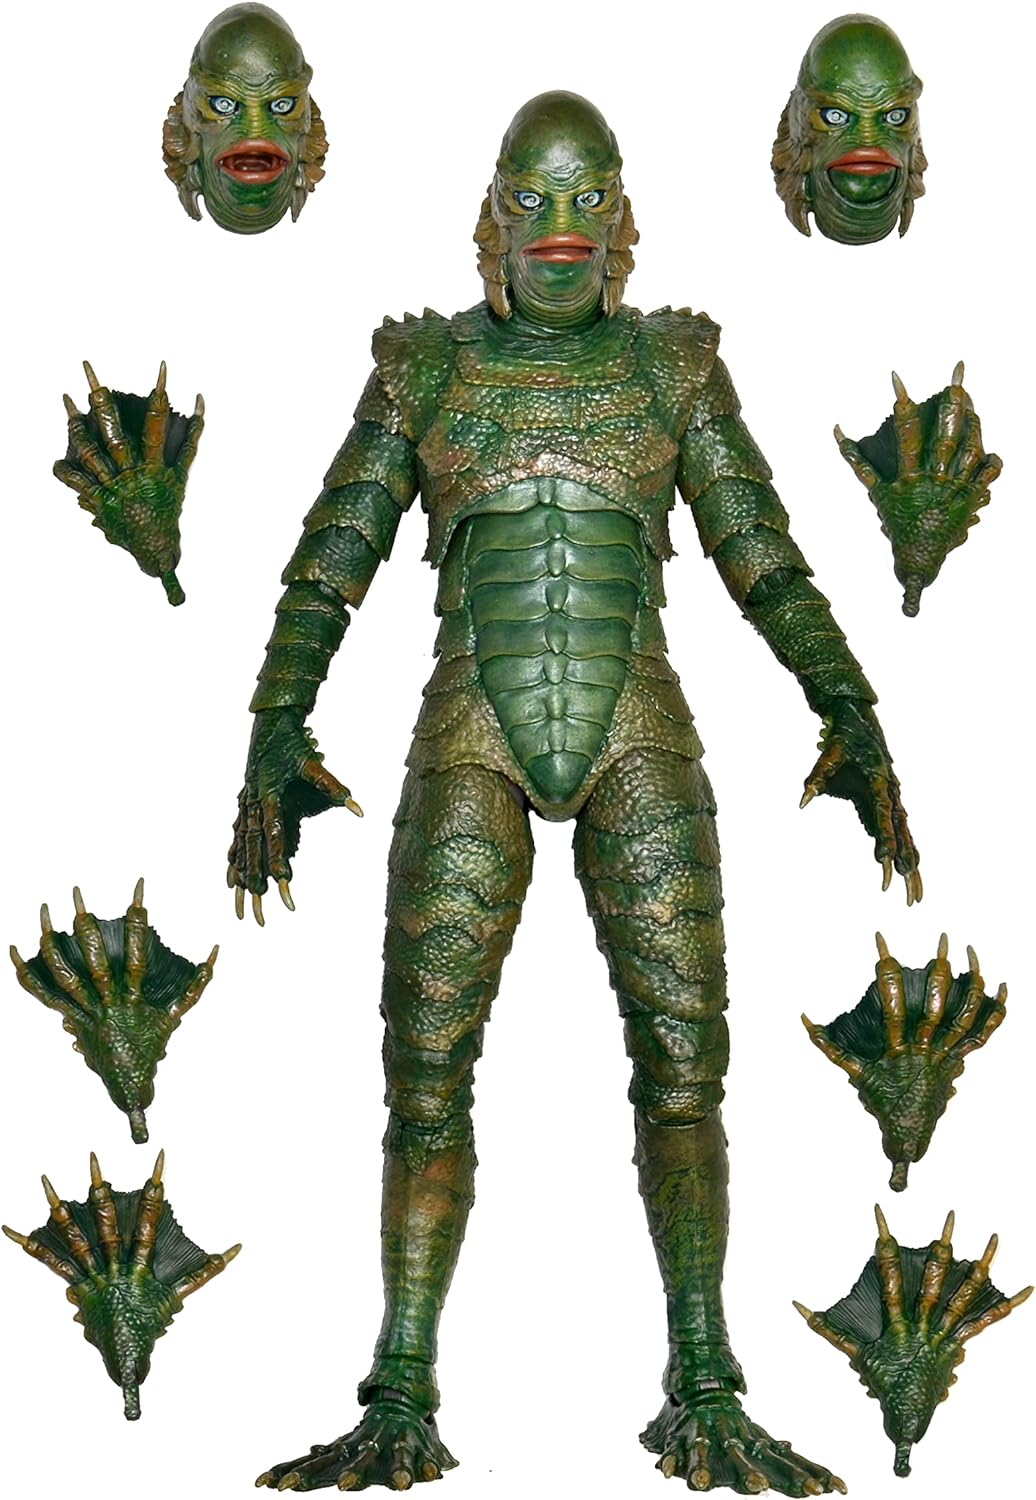 NECA Universal Monsters Ultimate Creature from the Black Lagoon (Colour Version) 7" Action Figure